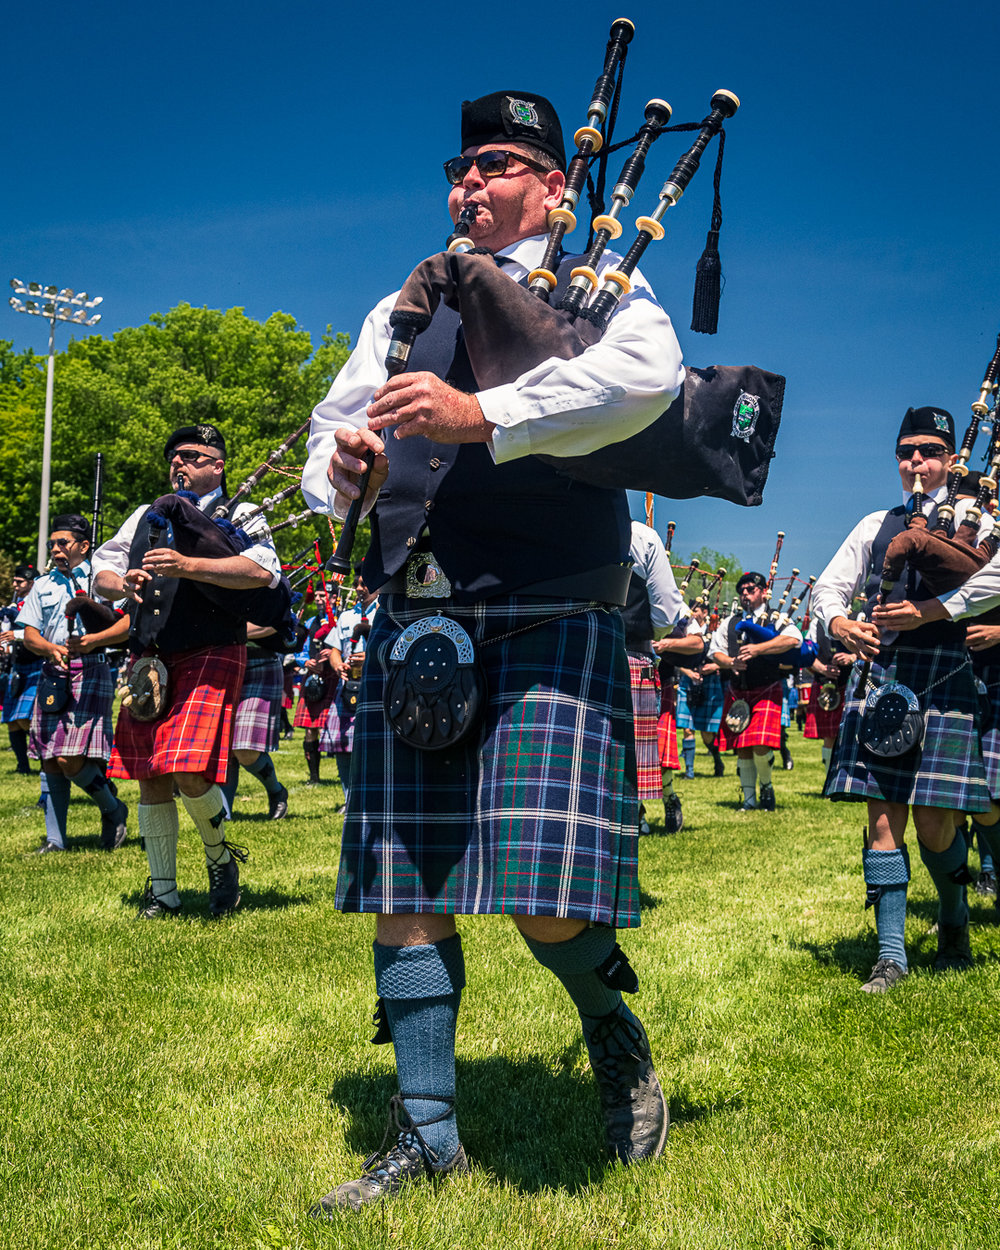 Georgetown Highland Games - Massed Bands